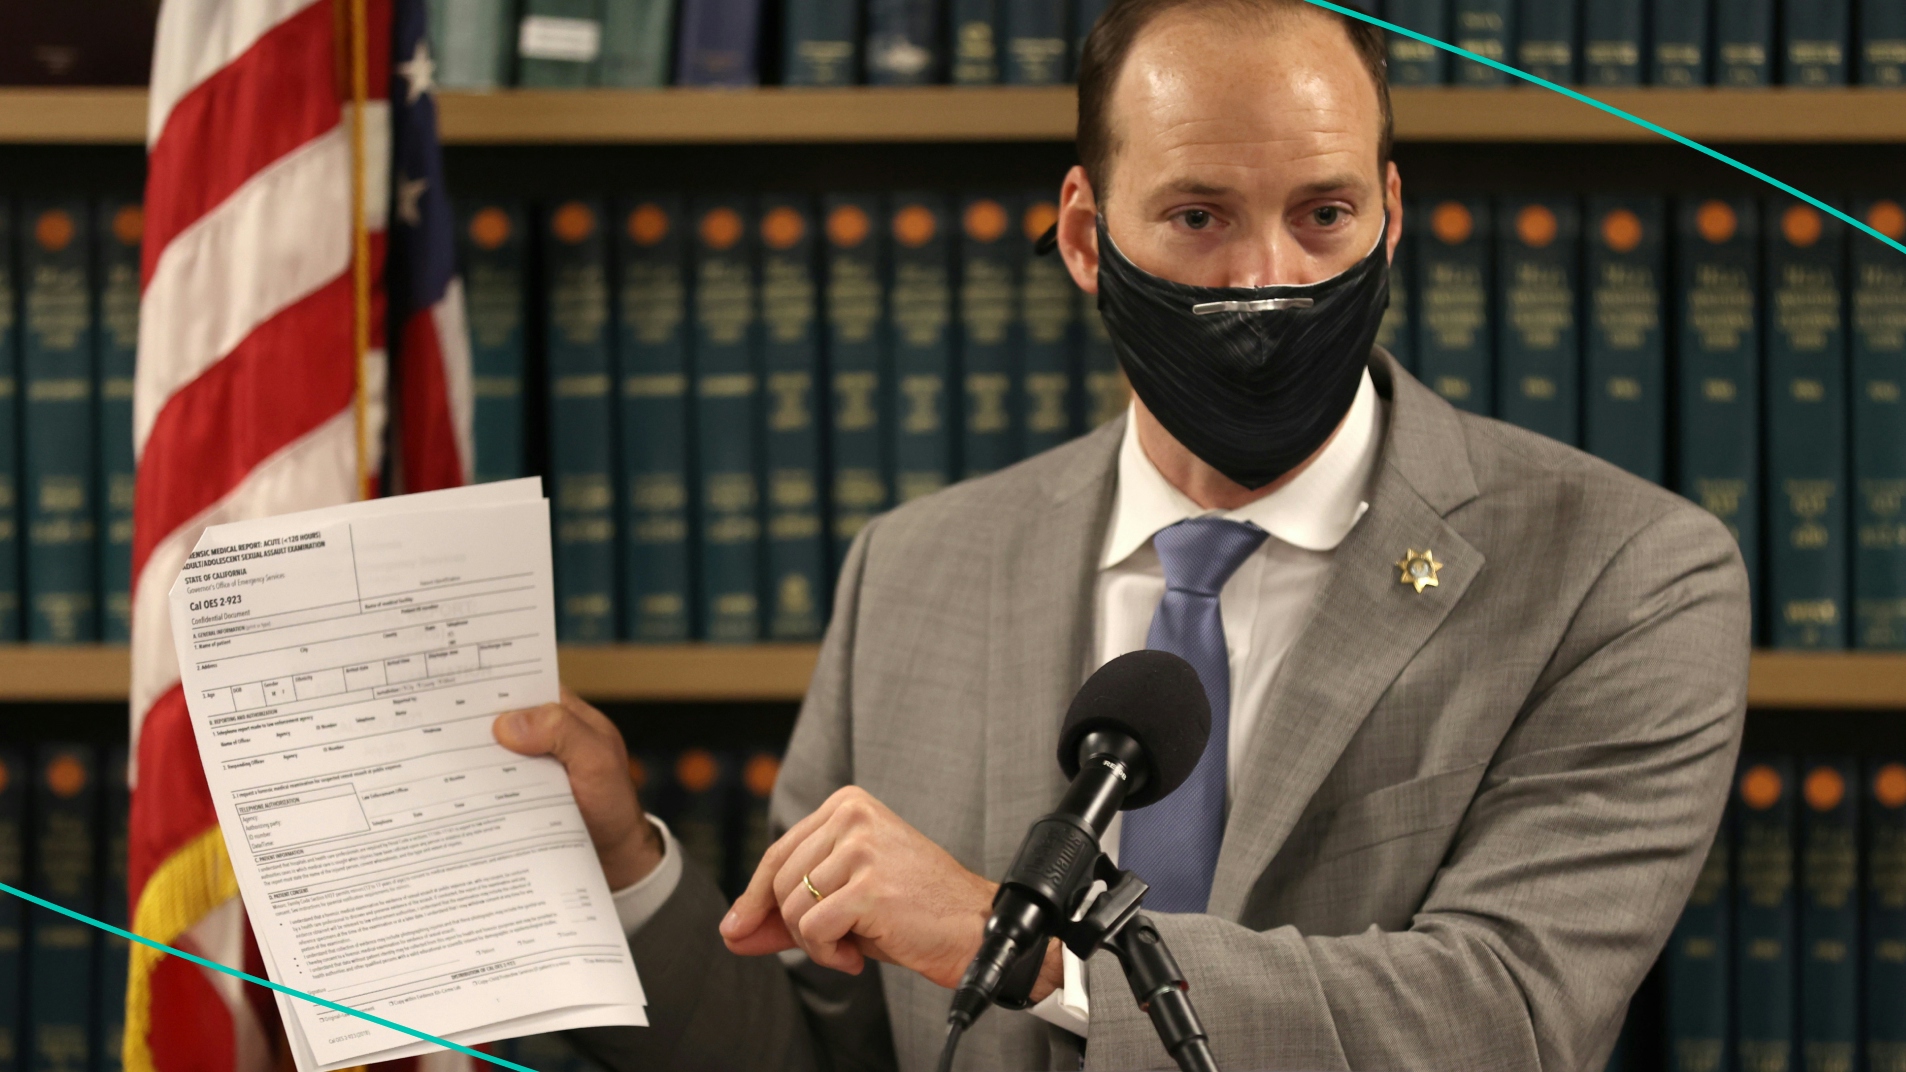 San Francisco District Attorney Chesa Boudin holds up a copy of the California State medical examination form for sexual assault victims as he speaks during a press conference at his office on February 15, 2022 in San Francisco, California.